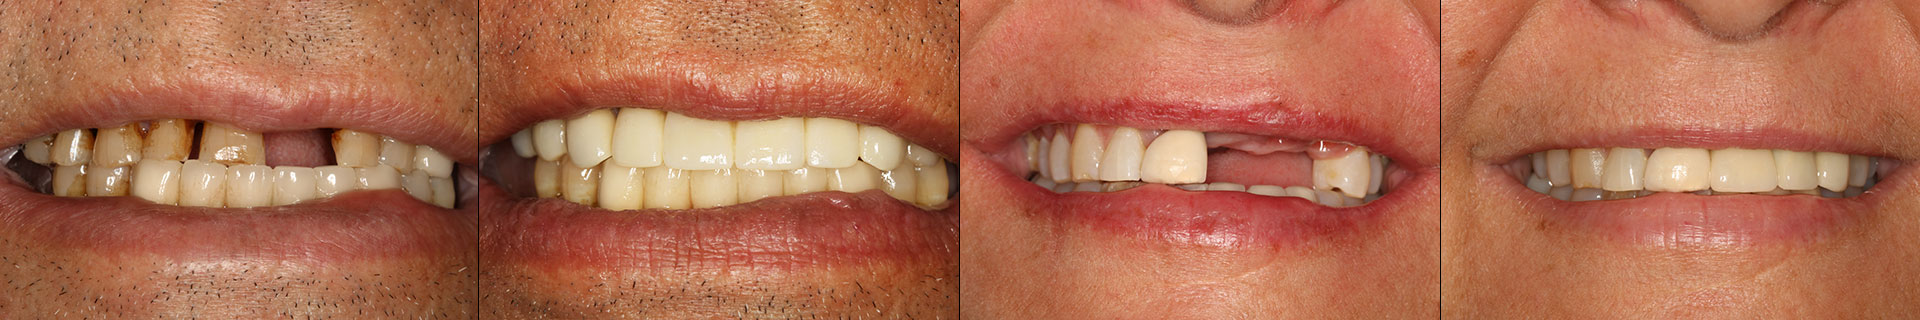 Before and After - Dental Implants in Pembroke Pines, FL